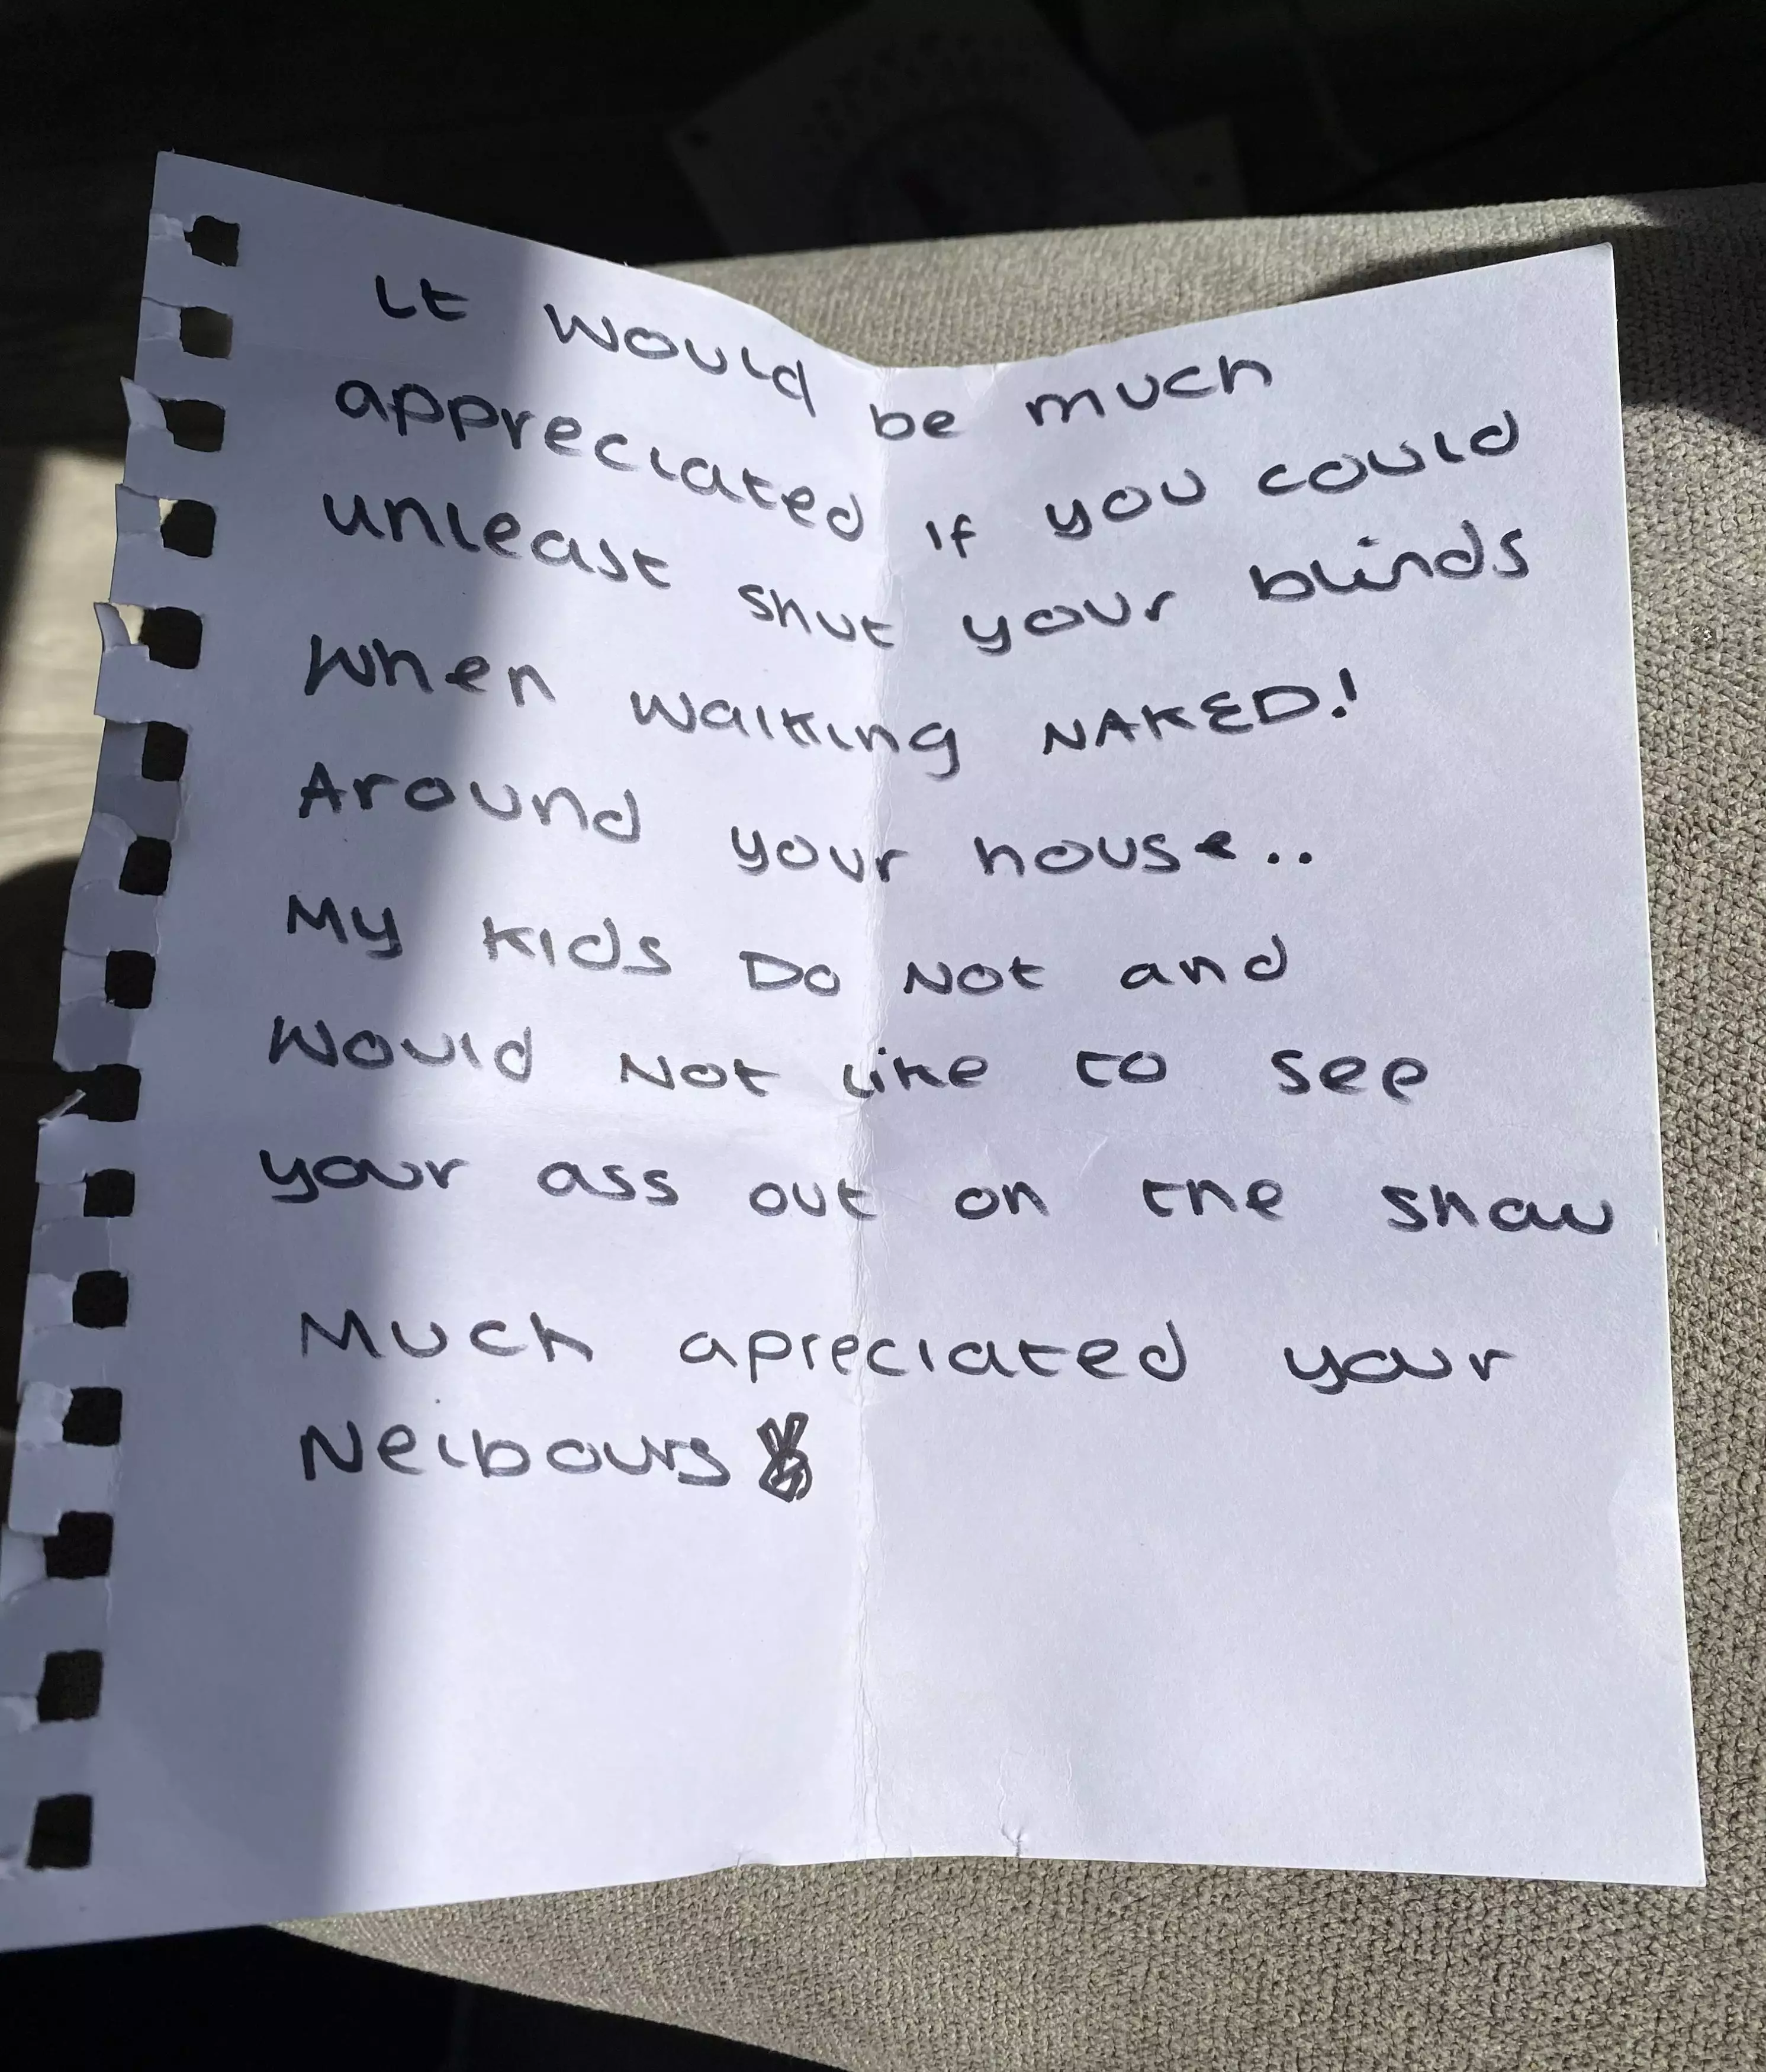 This letter was posted on the mum's windshield (